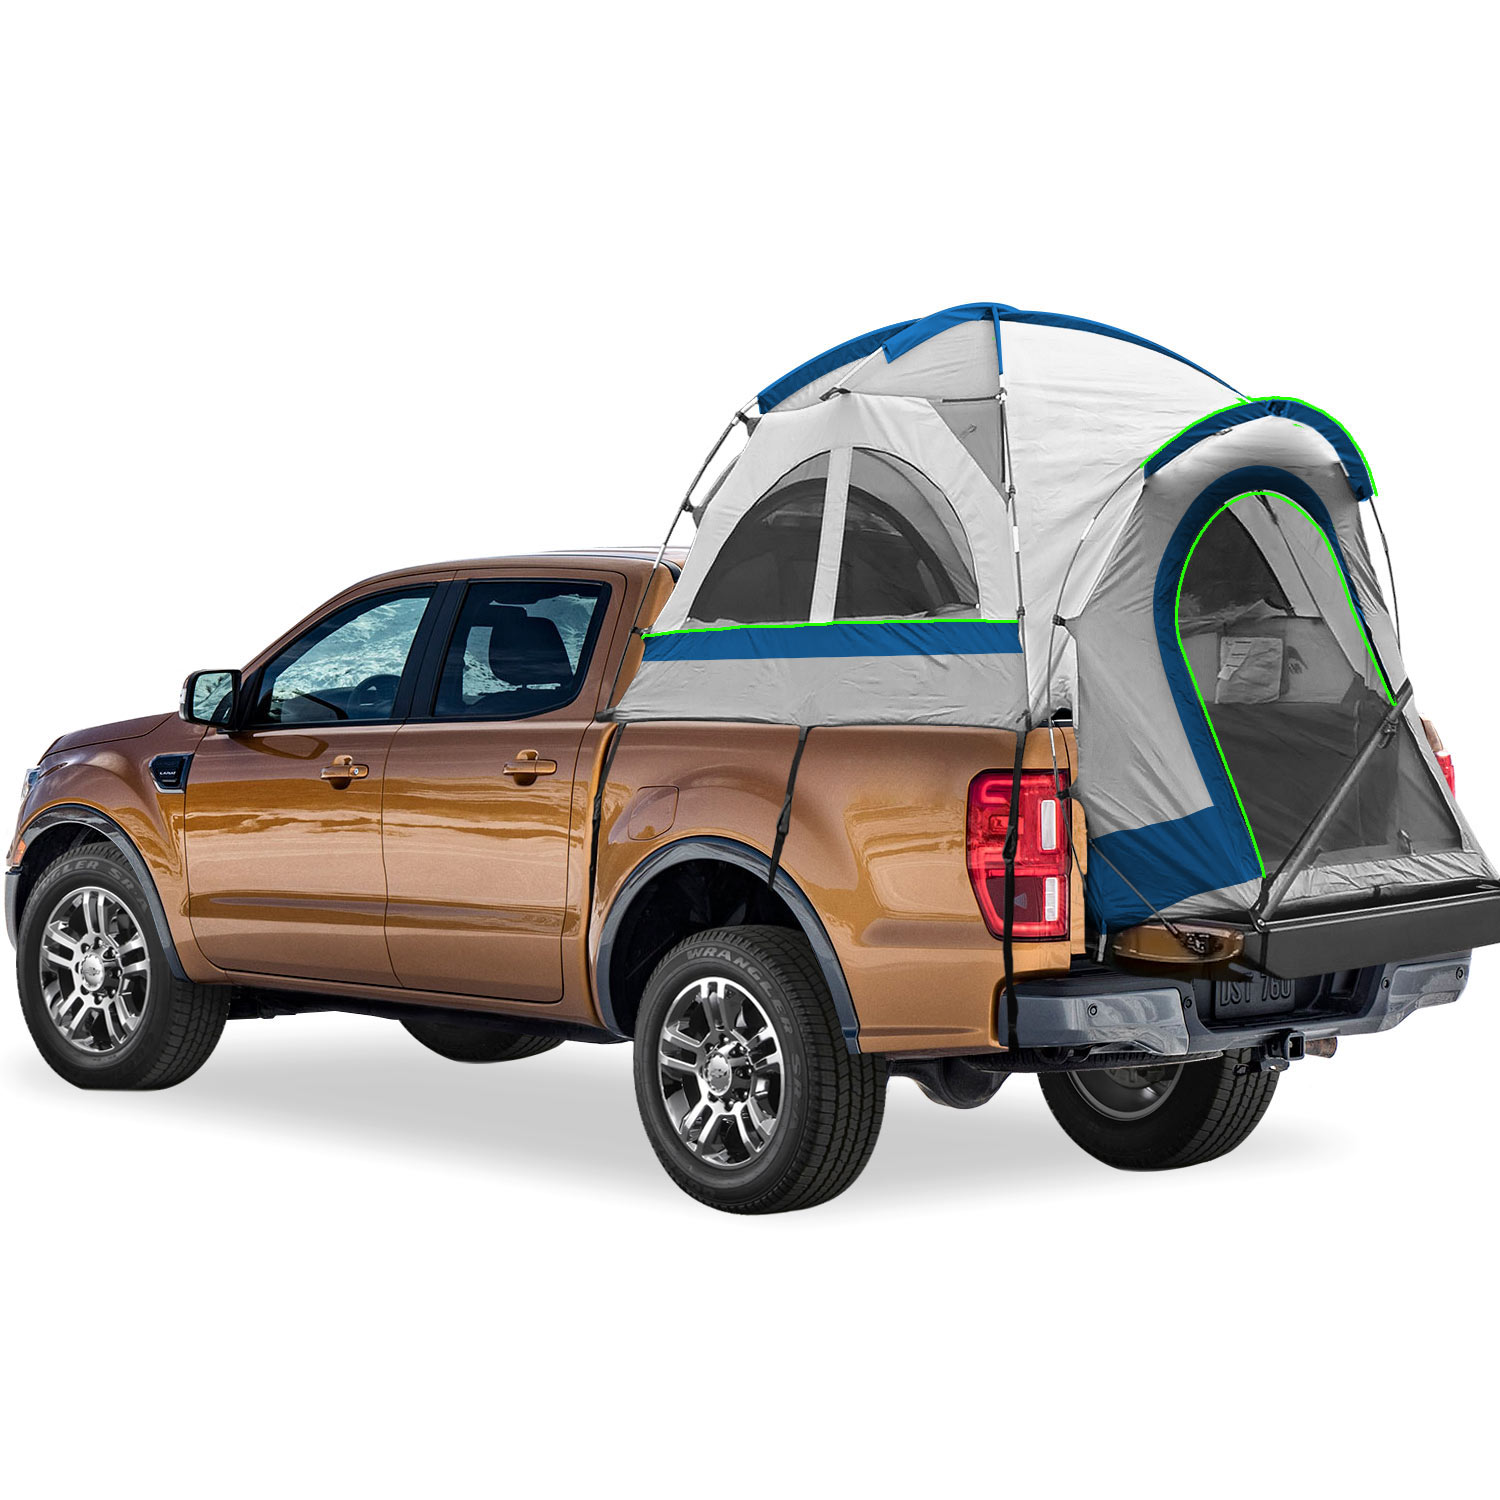 North East Harbor Pickup Truck Bed Camping Tent, 2-Person Sleeping Capacity, Includes Rainfly and Storage Bag - Fits Full Size Truck with Short